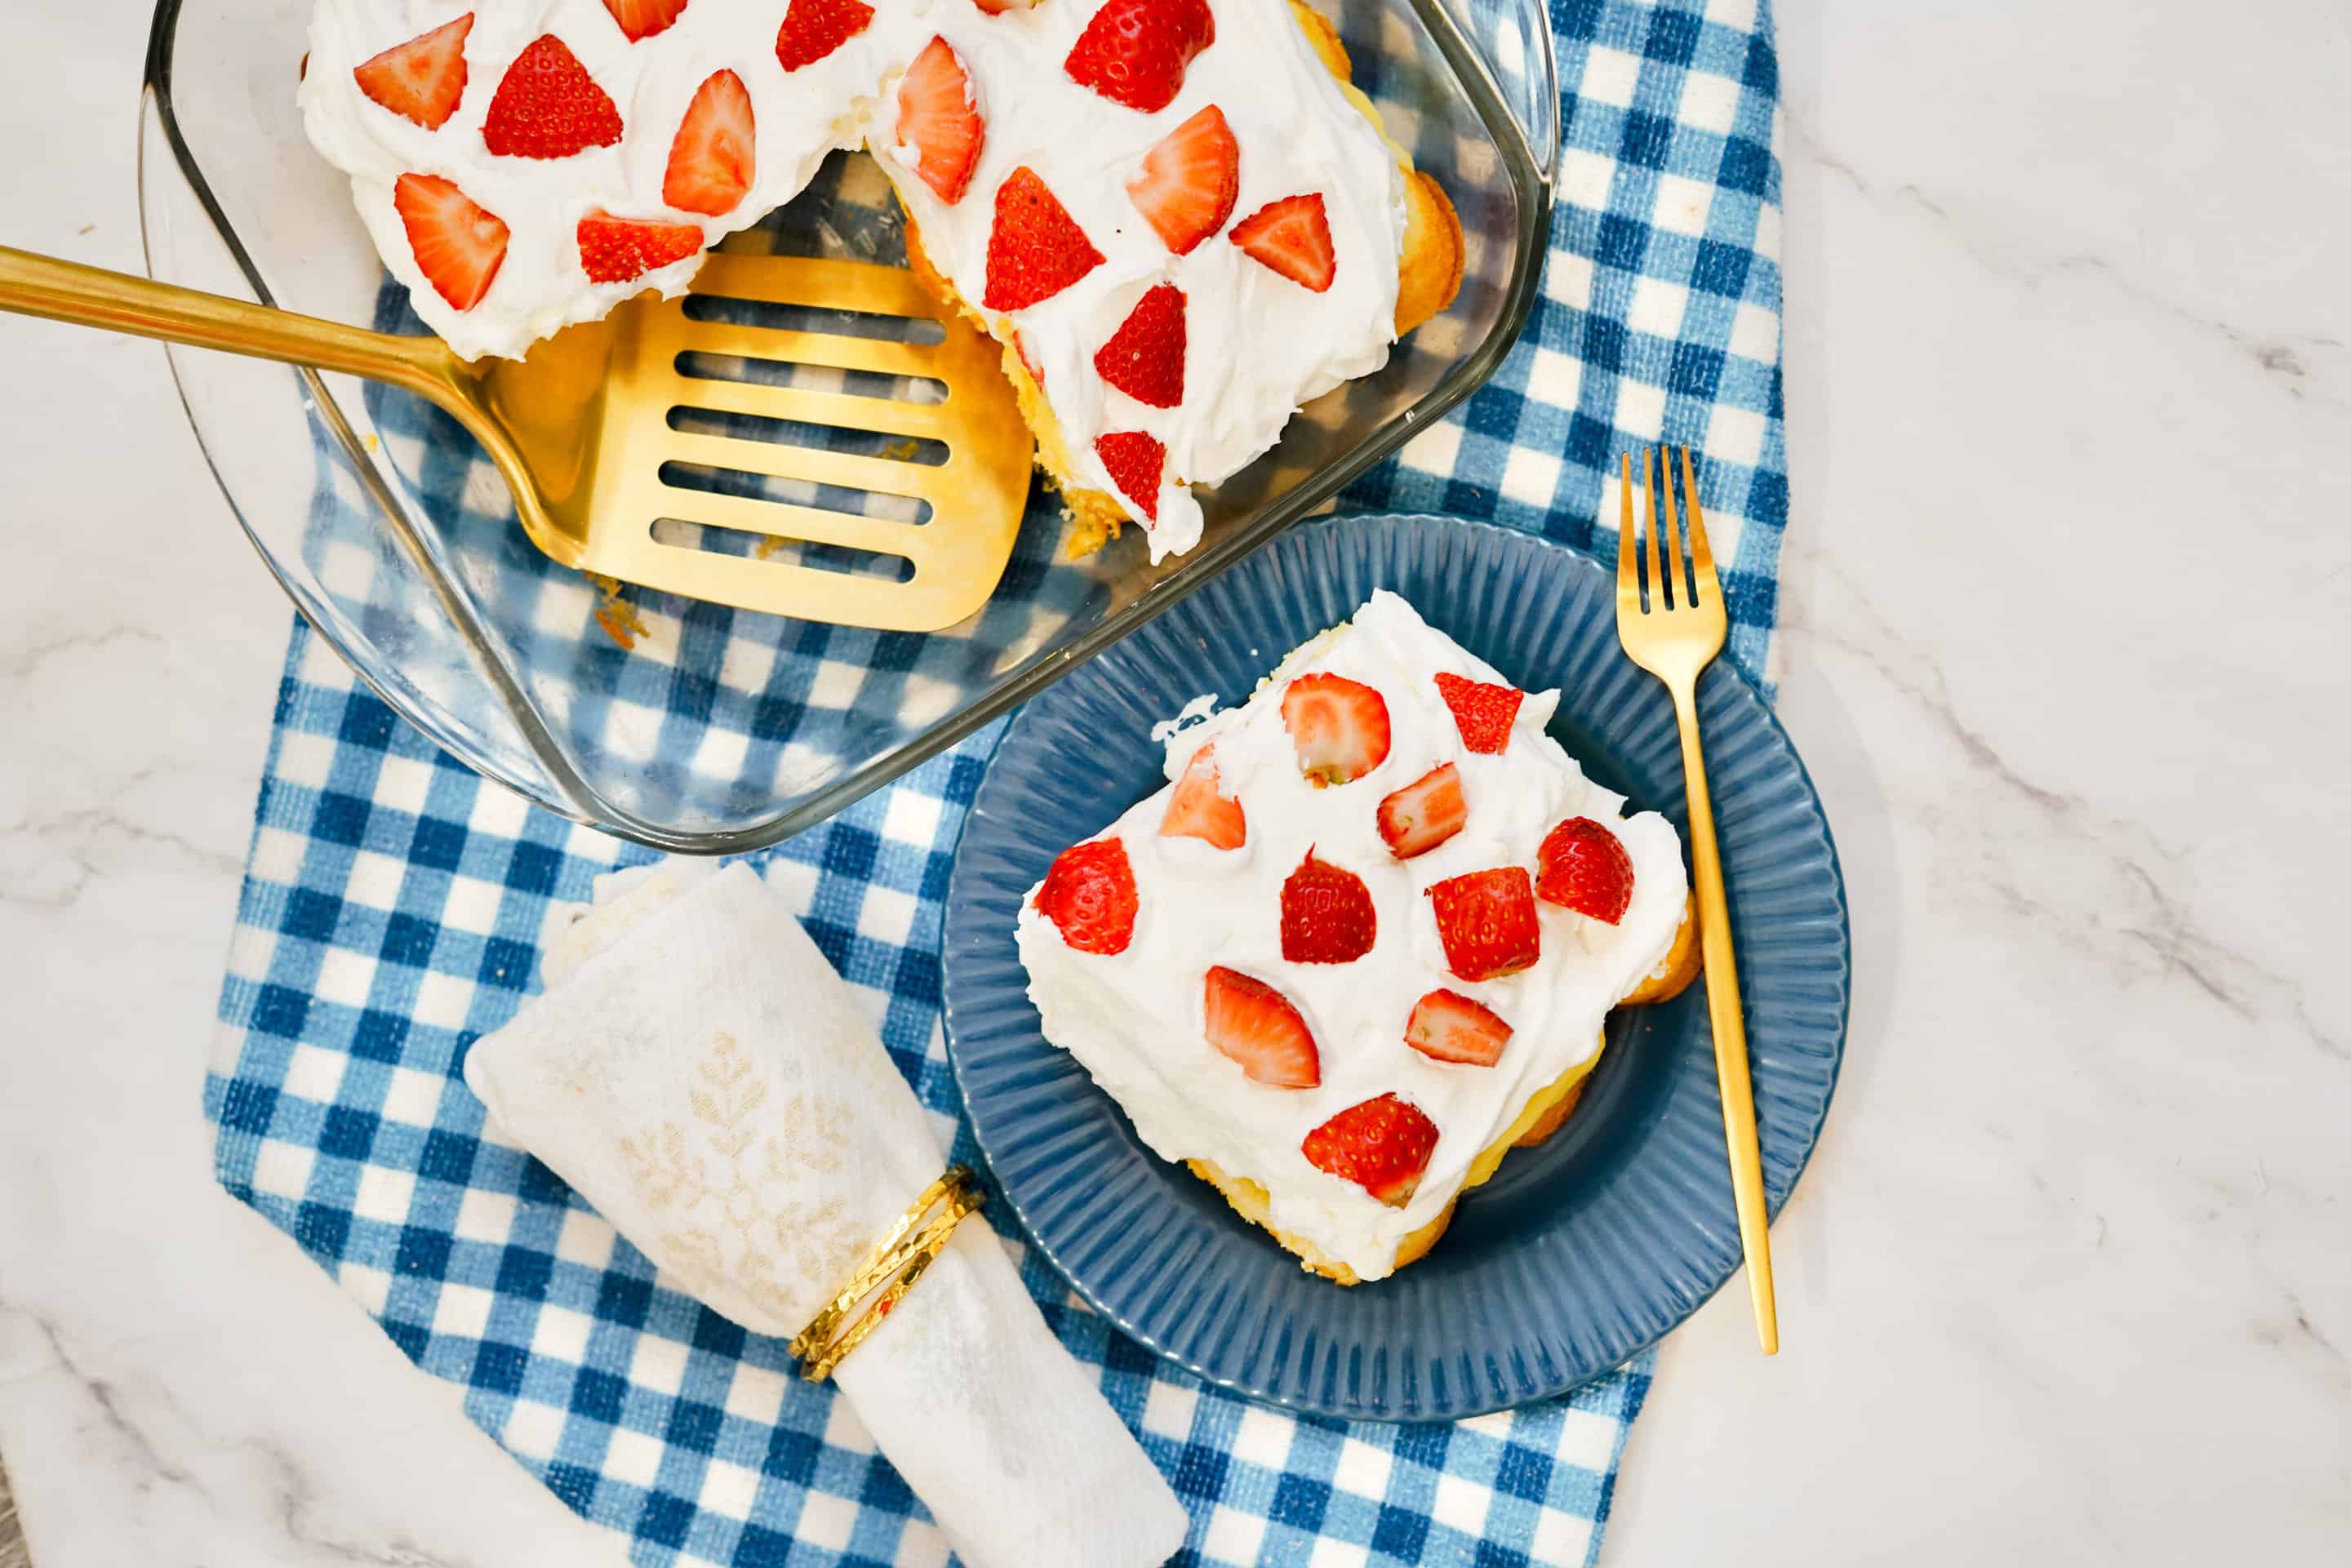 This no bake strawberry Twinkie cake is the perfect summer dessert. It's also so easy to make!